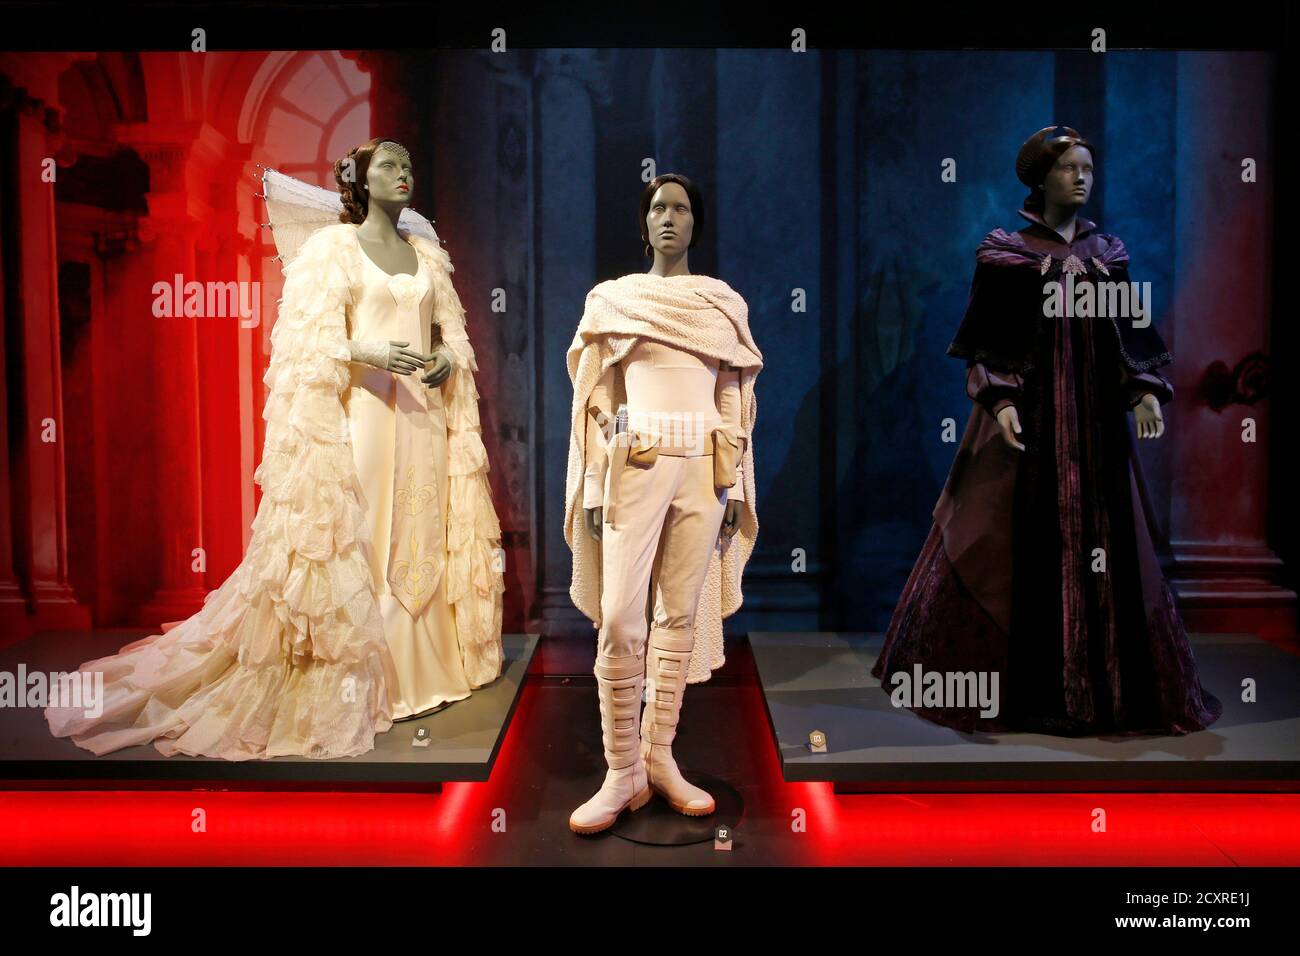 Costumes of the Padme Amidala character from the from the Star Wars film  series are seen during press day at the exhibit "Star Wars Identities" at  the "Cite du Cinema" movie studios